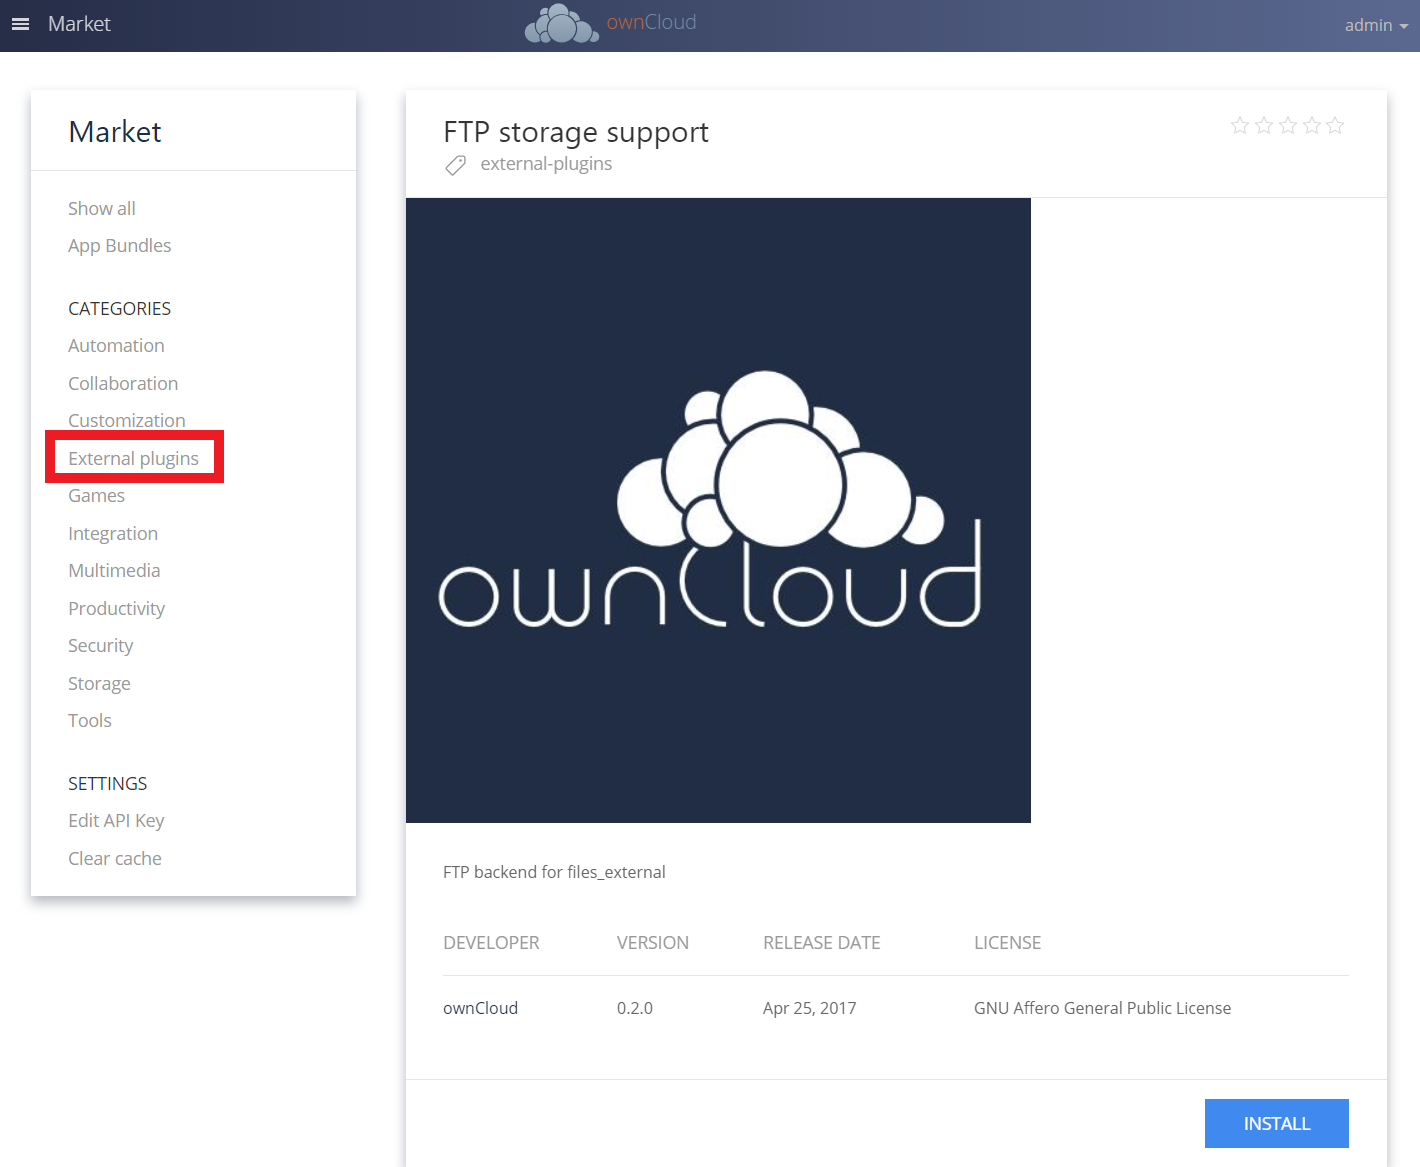 The ownCloud FTP Storage Support App